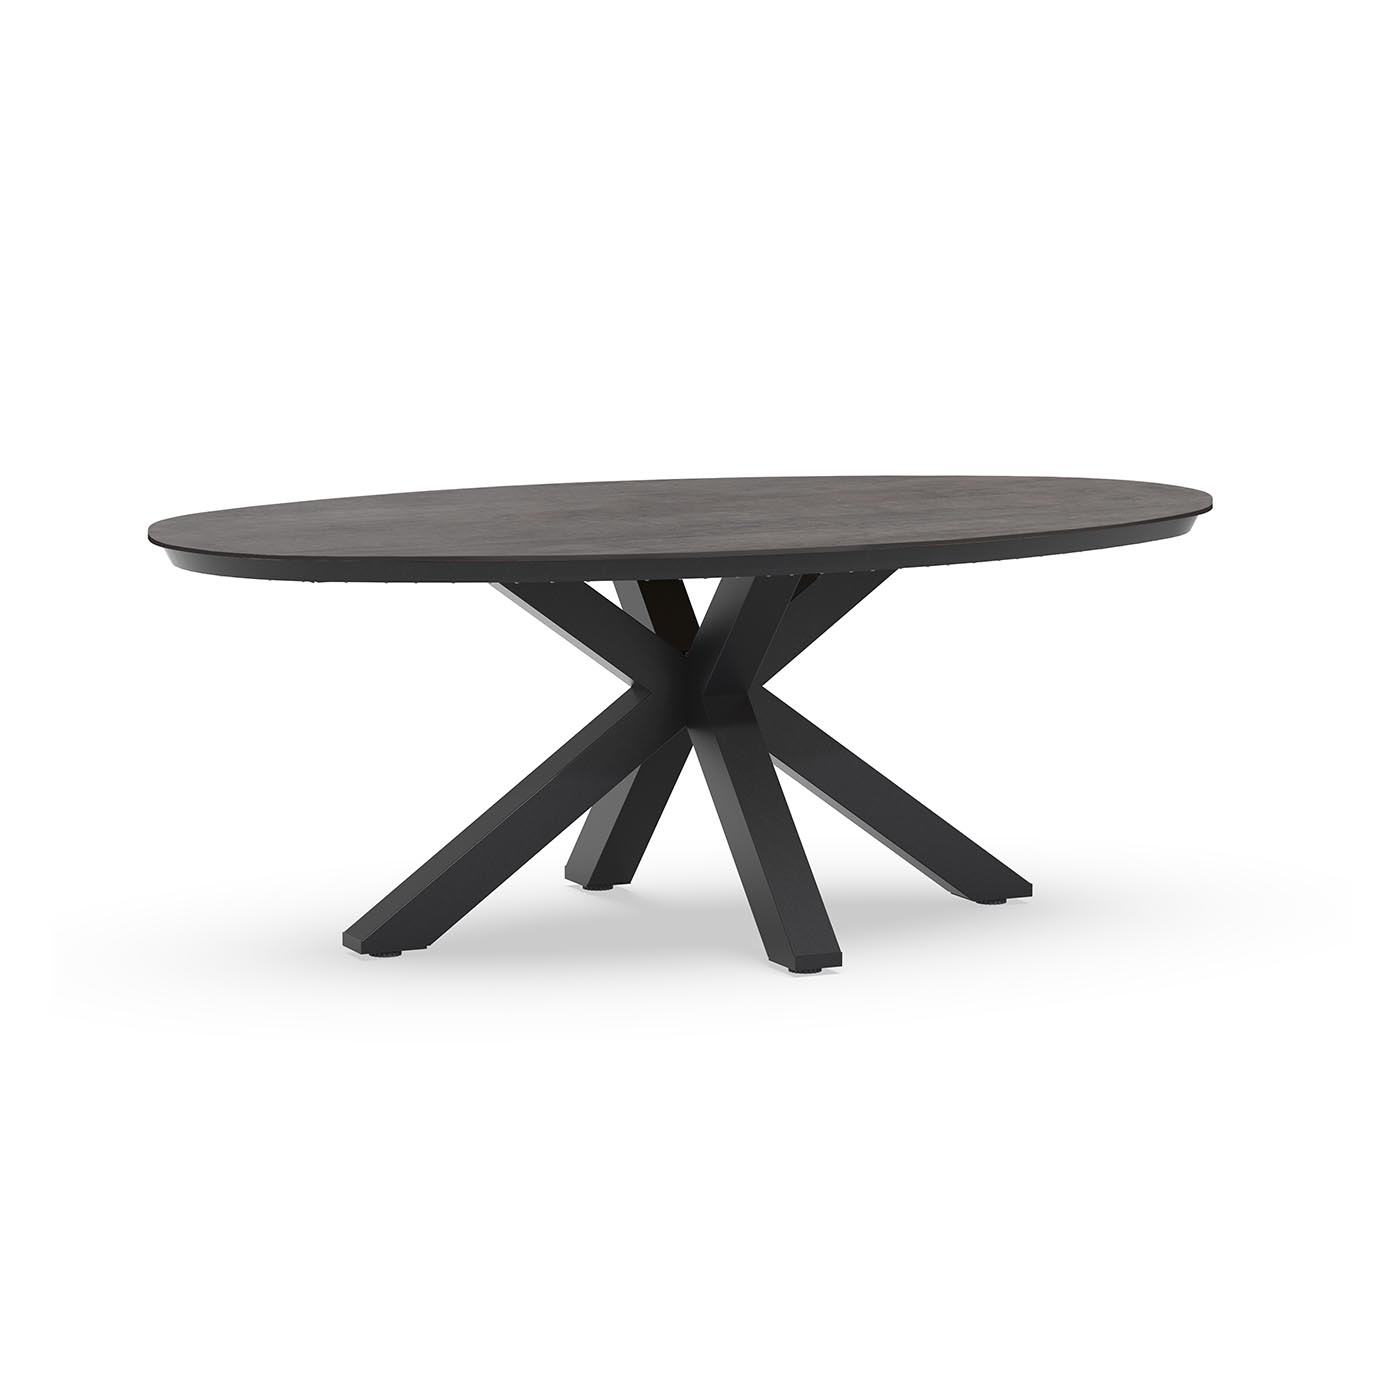 Oblong Dining Table Trespa Forest Grey 200 x 110 cm Charcoal